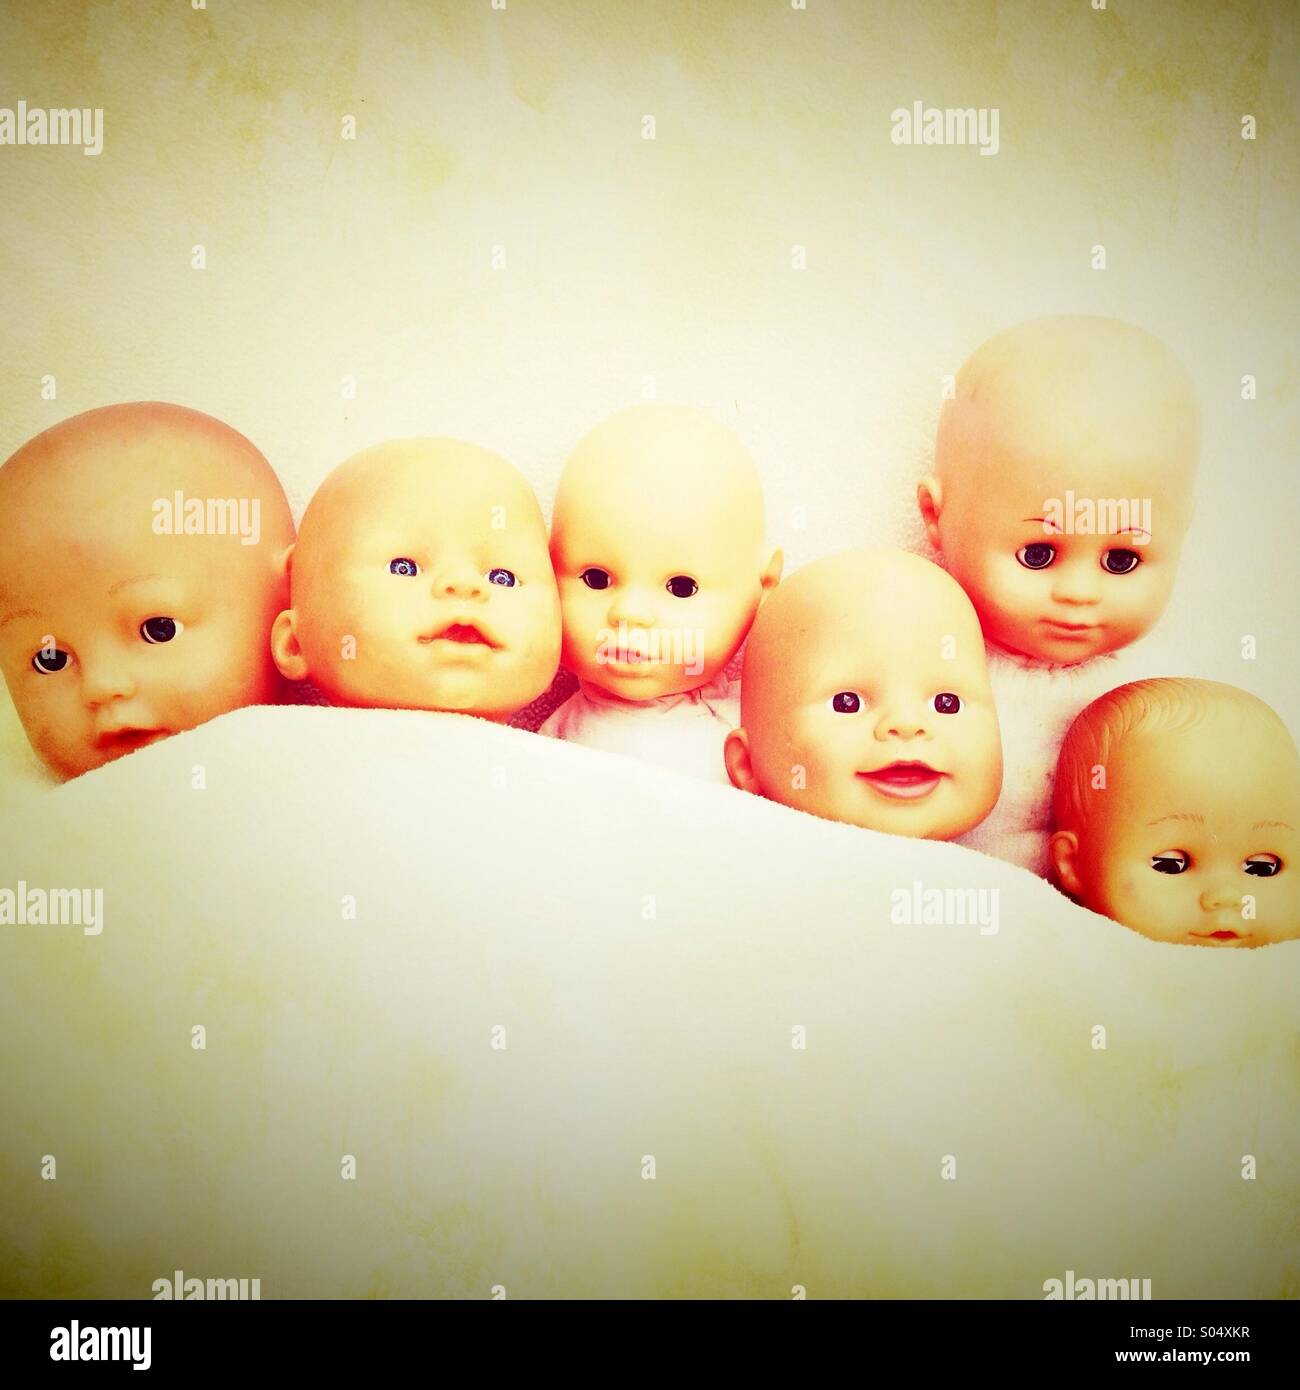 Baby toy dolls tucked up in bed Stock Photo